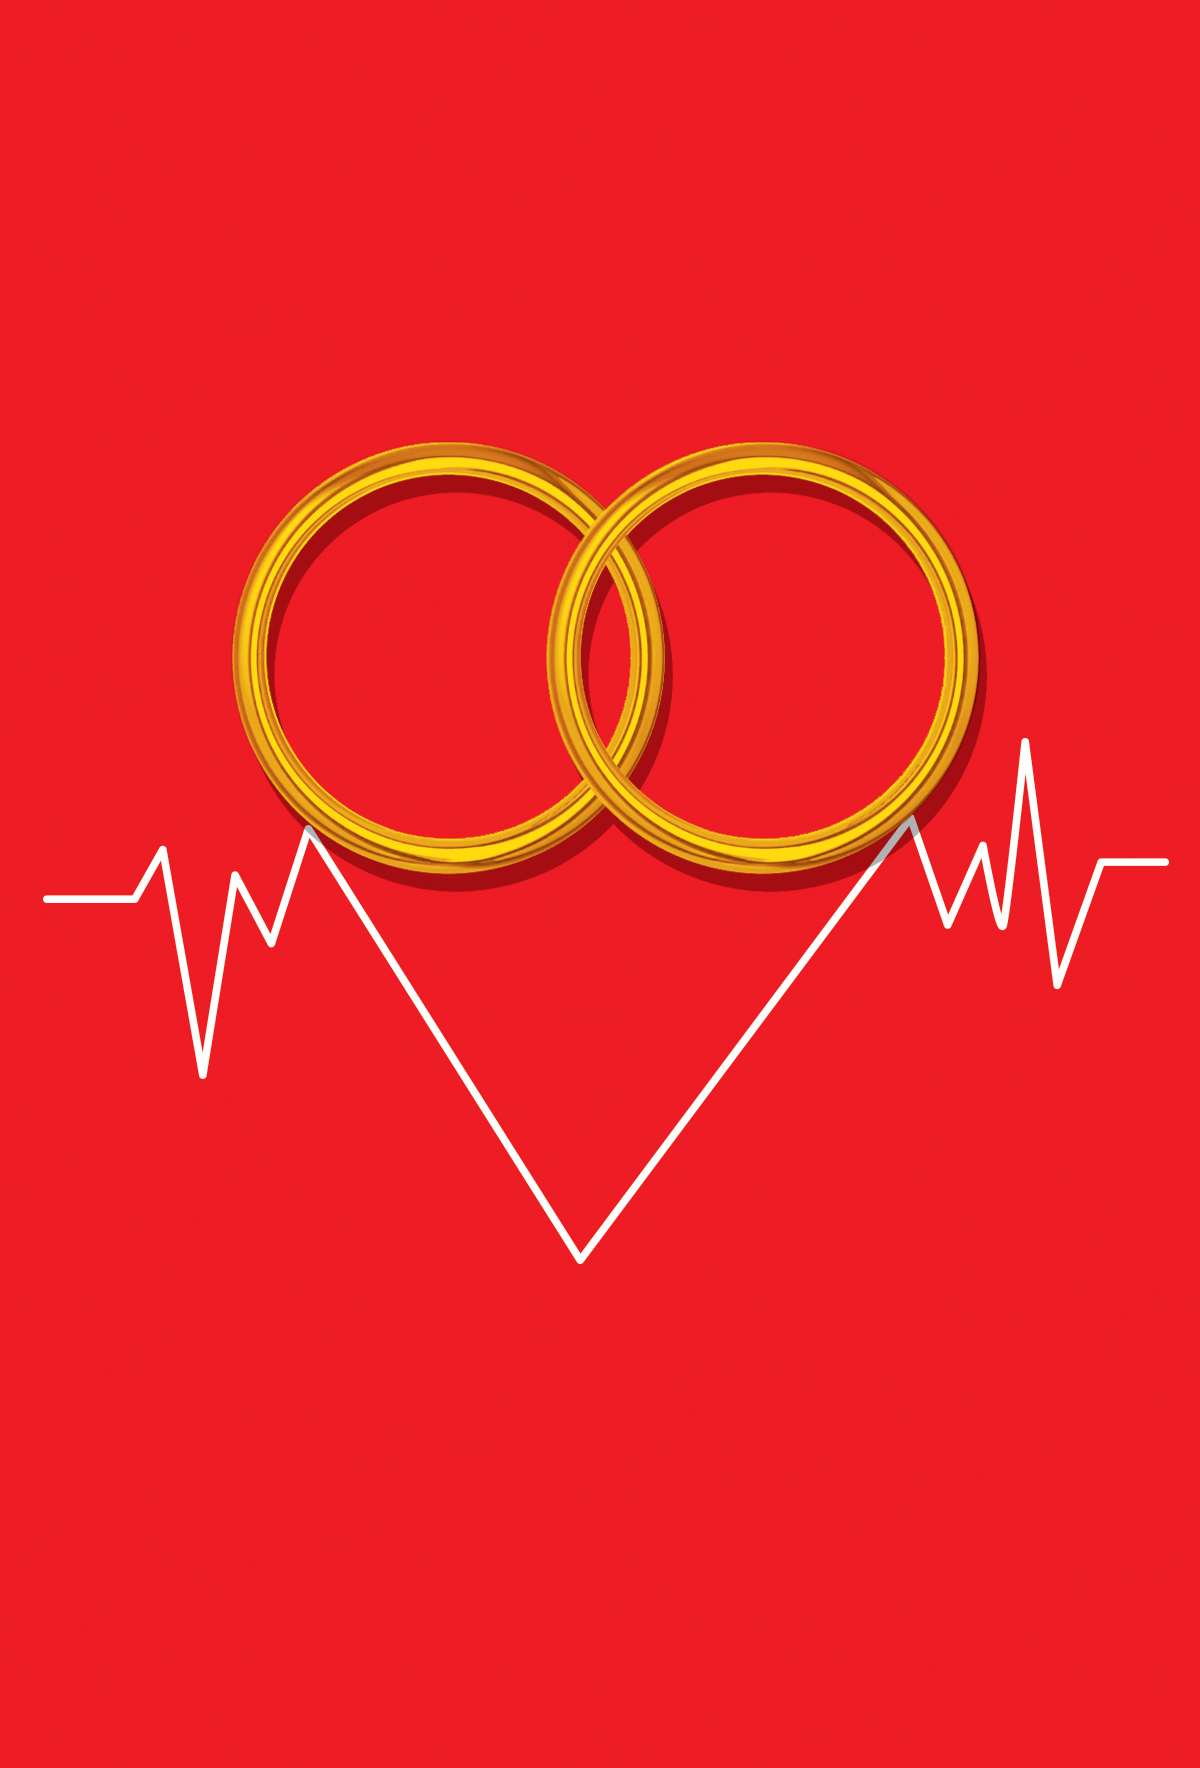 New research suggests the strength of a marriage positively affects heart health (Illustration by Oliver Munday for TIME)